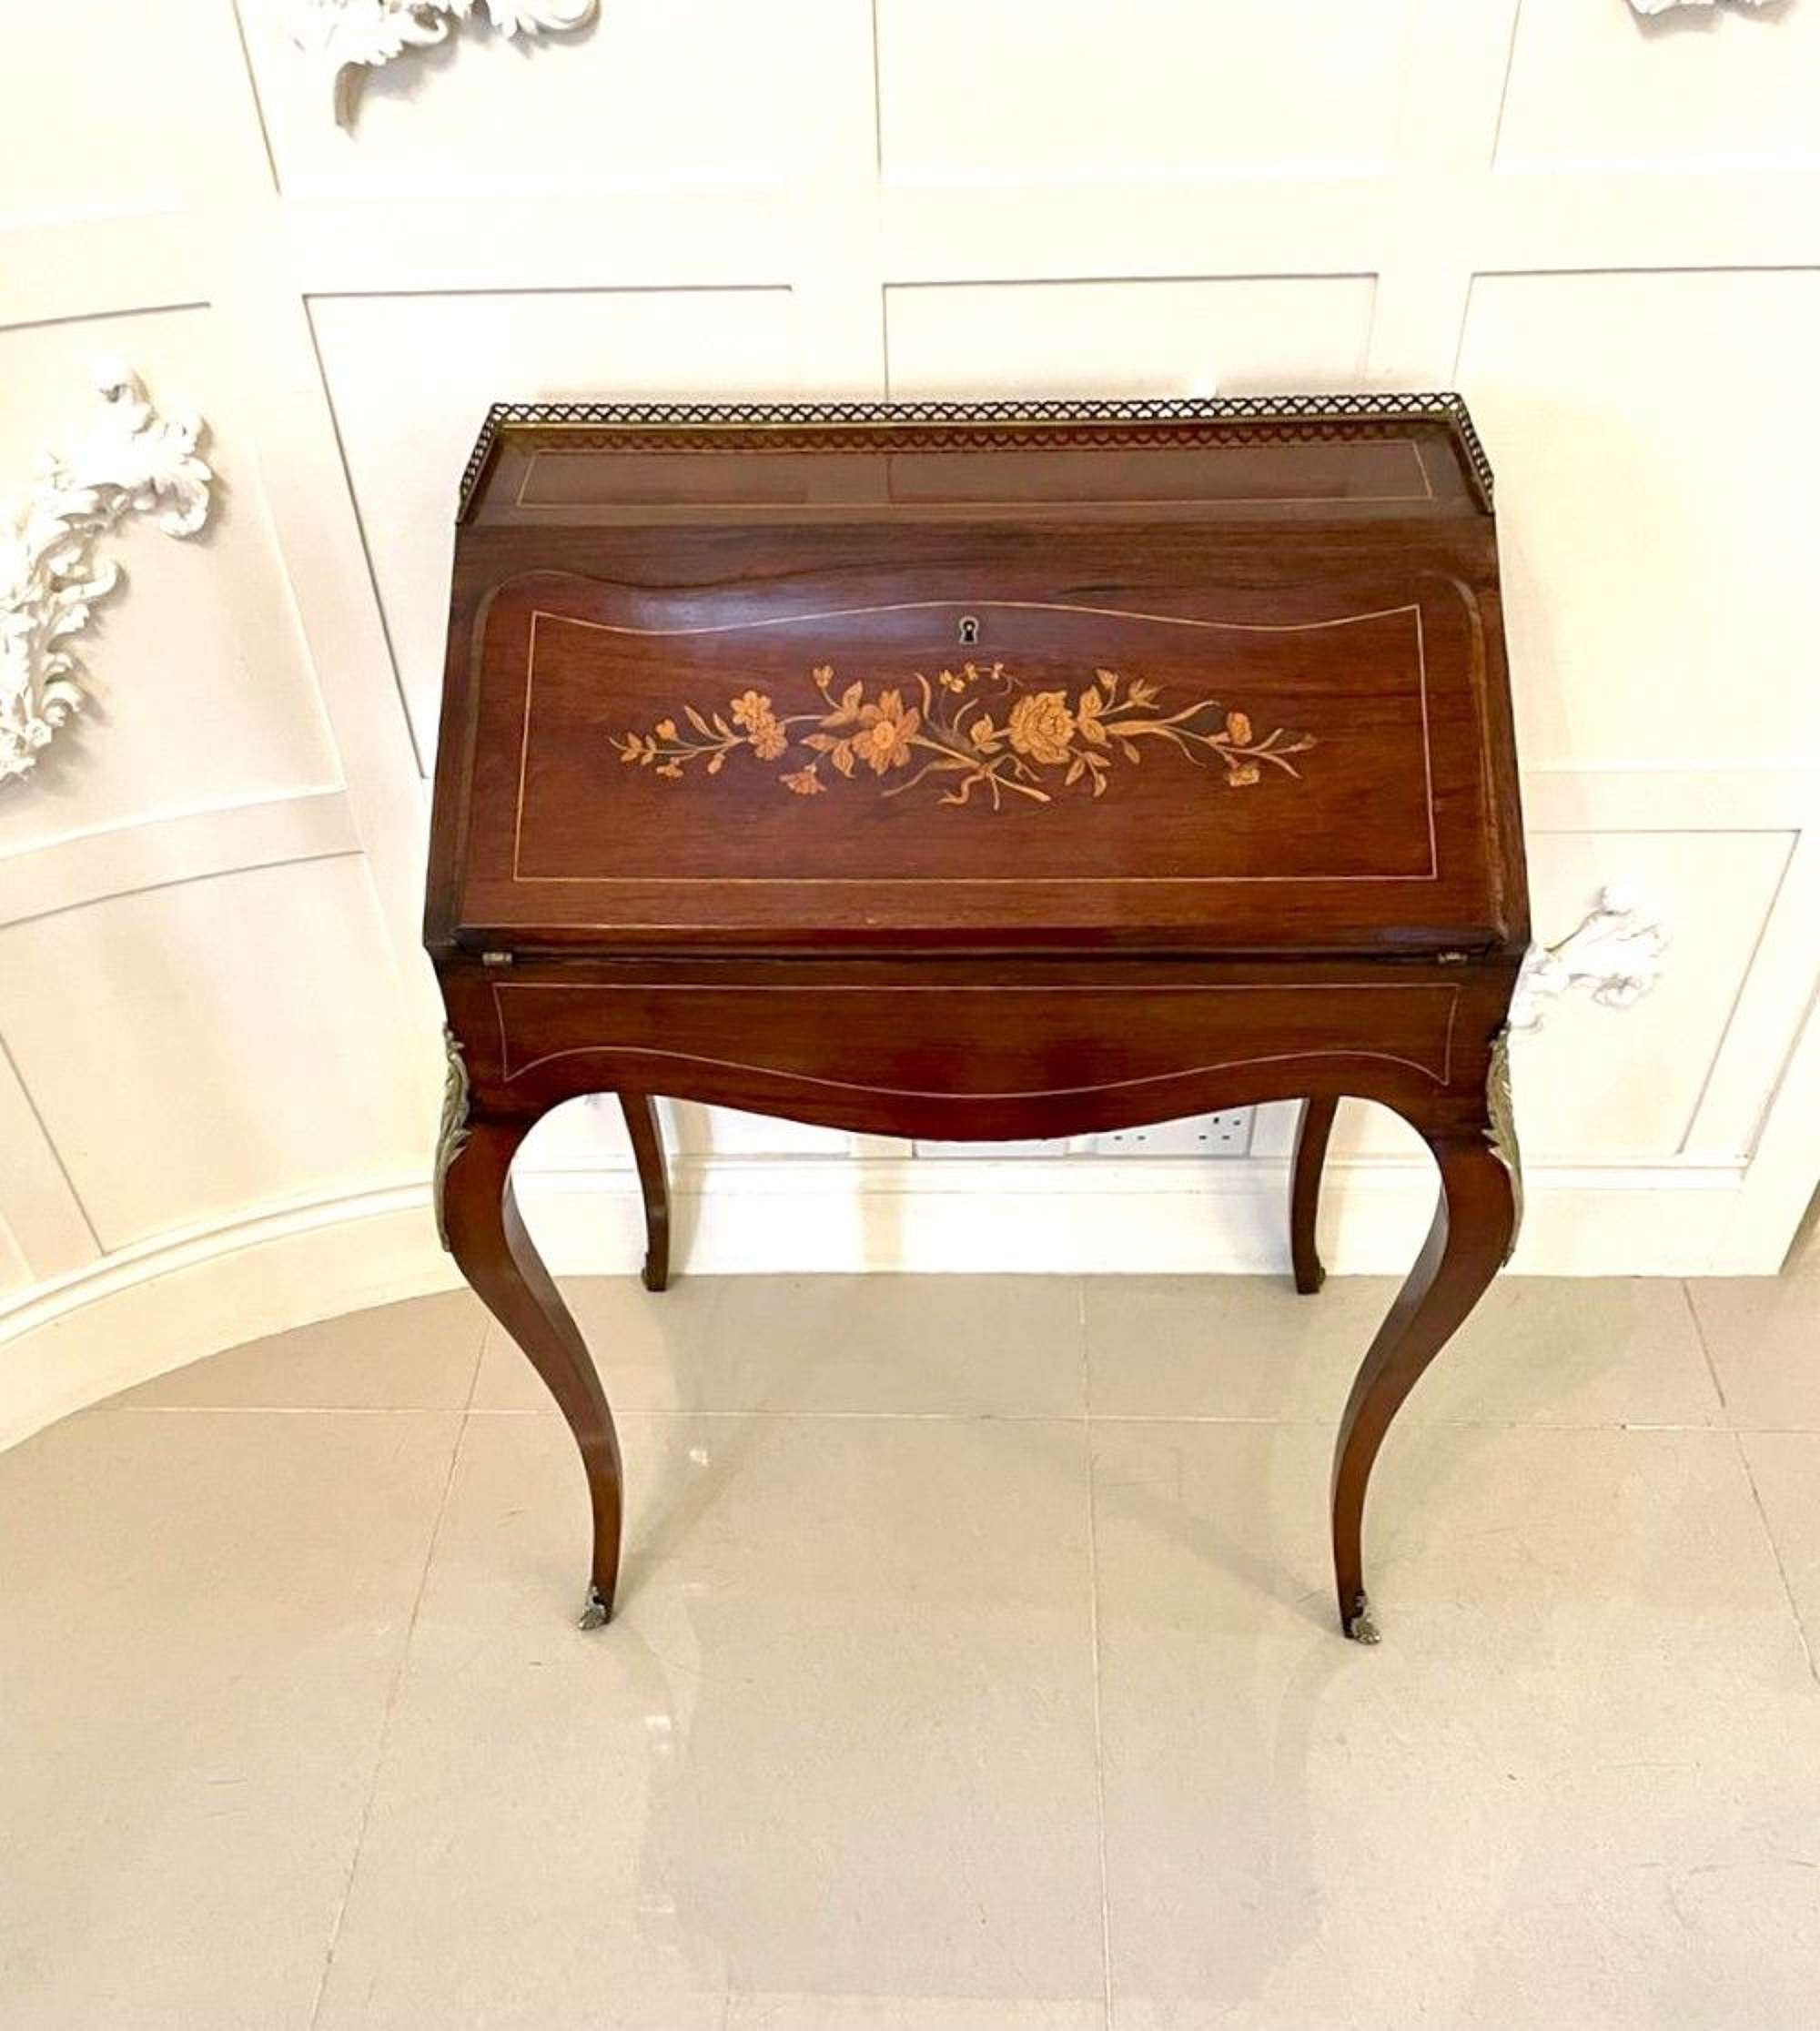 Antique Victorian French Inlaid Rosewood Freestanding Bureau